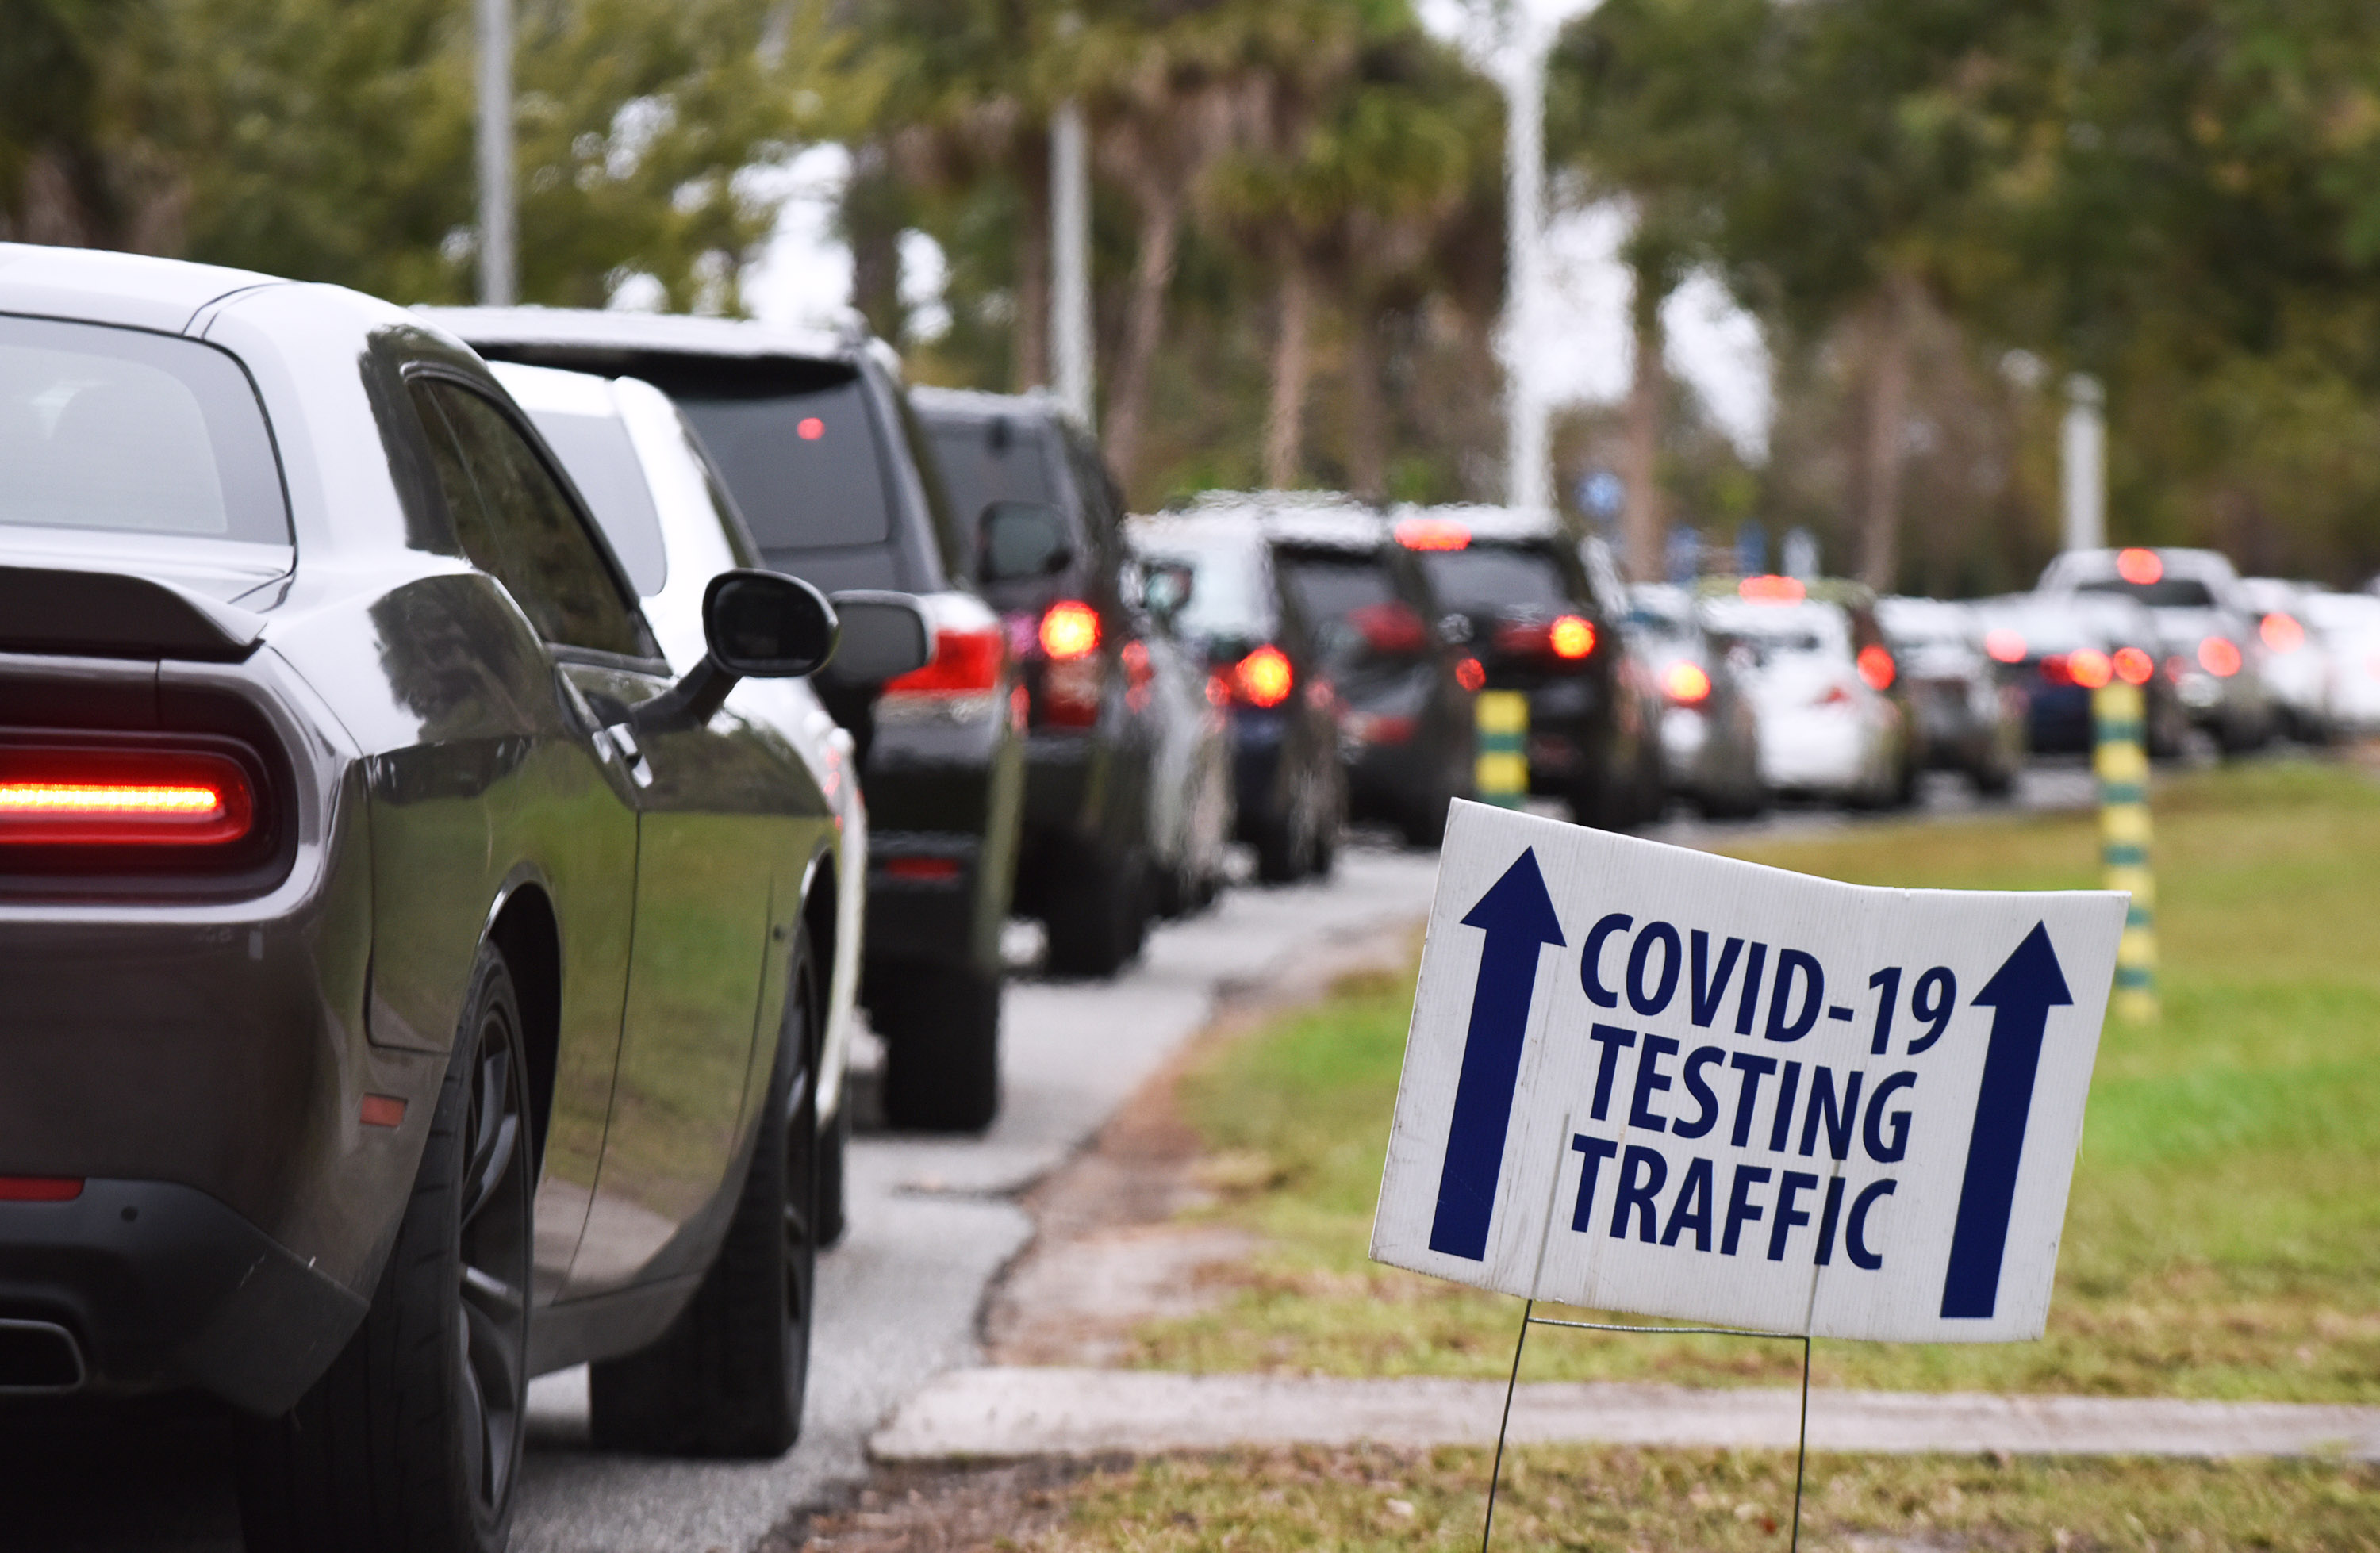 People wait in line at a Covid-19 testing and vaccination site in Orlando, Florida, on December 22.